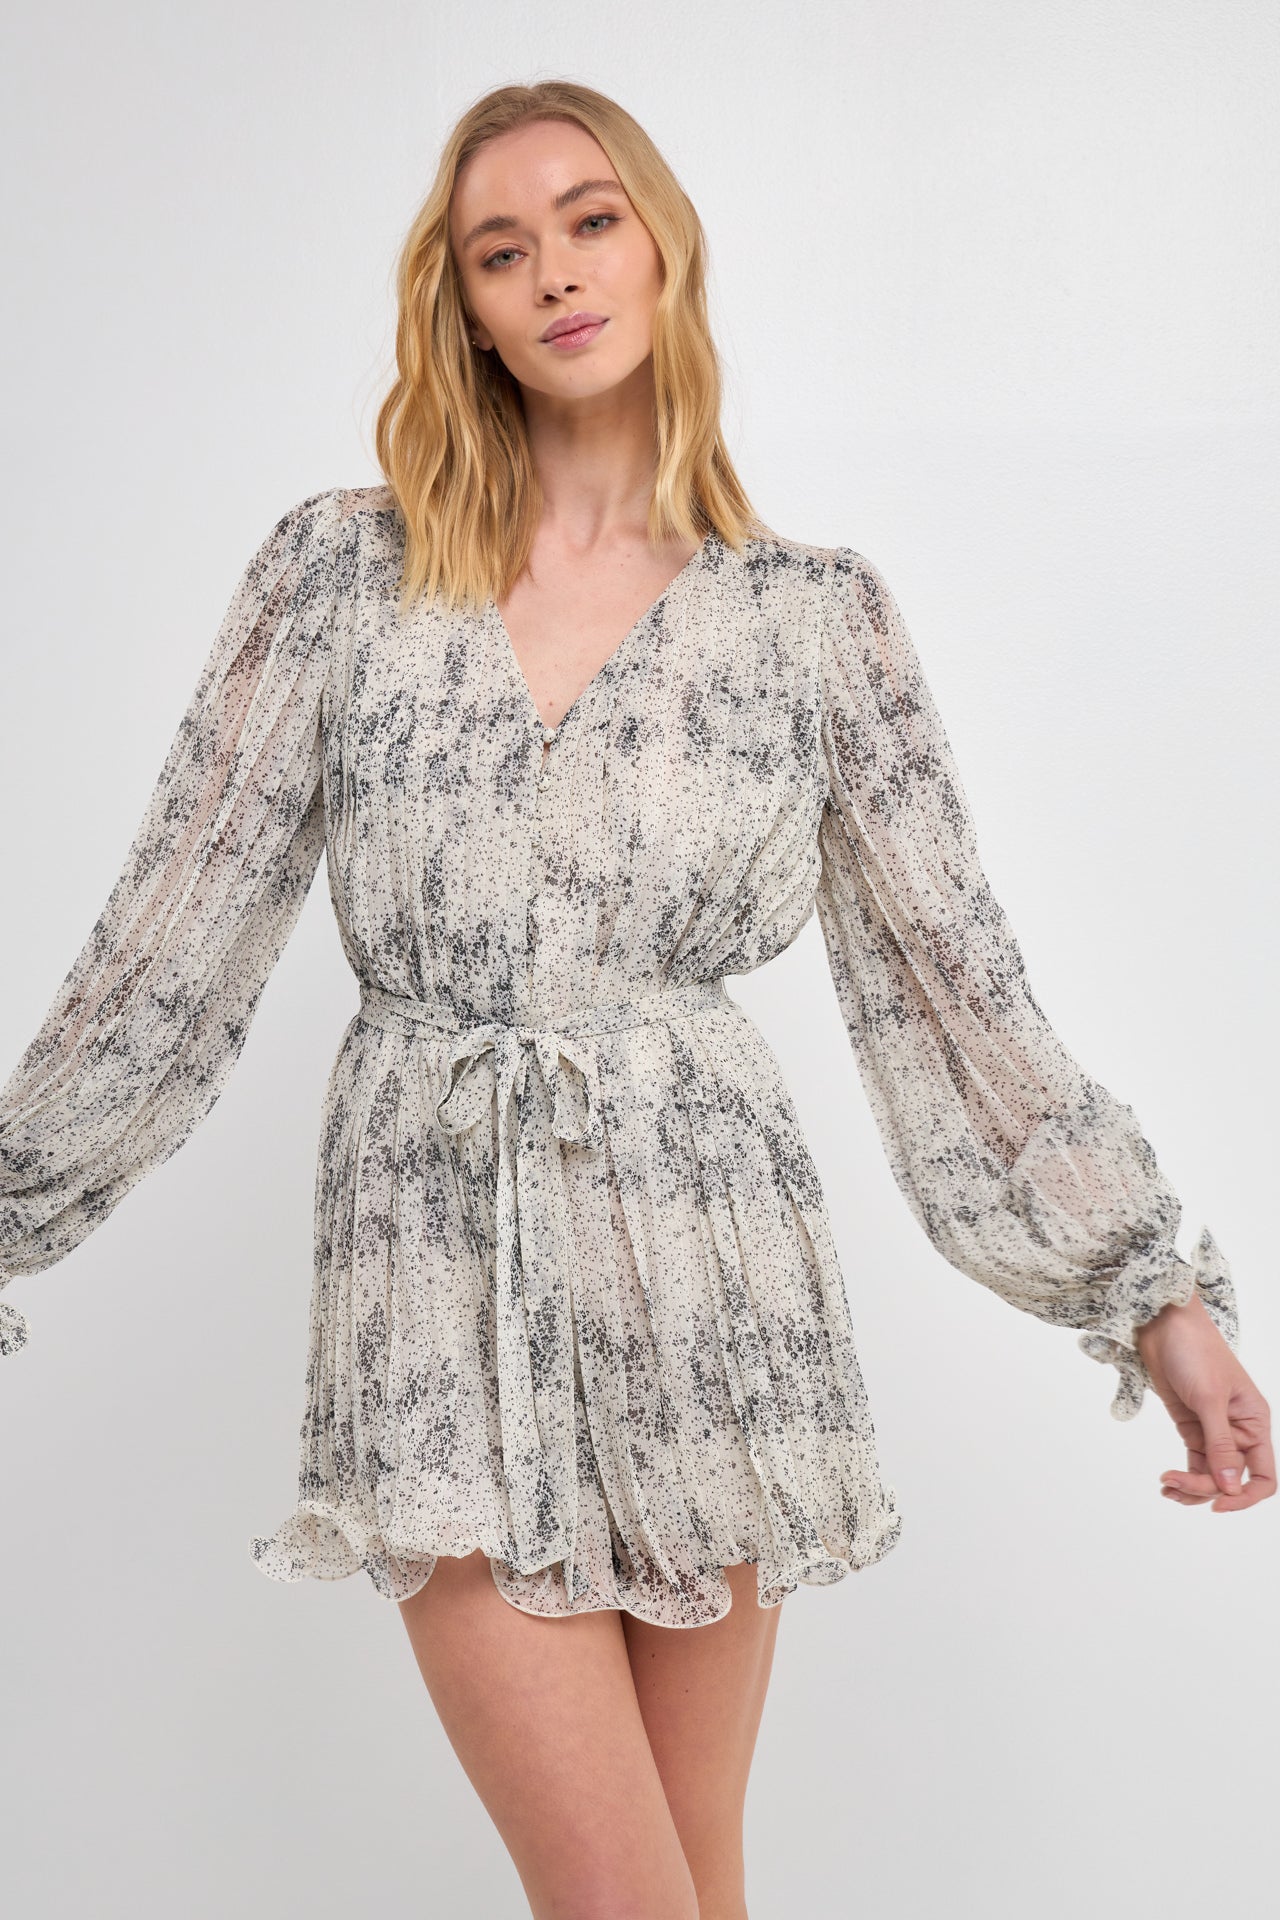 Endless Rose - Speckled Pleated Romper - Rompers in Women's Clothing available at endlessrose.com